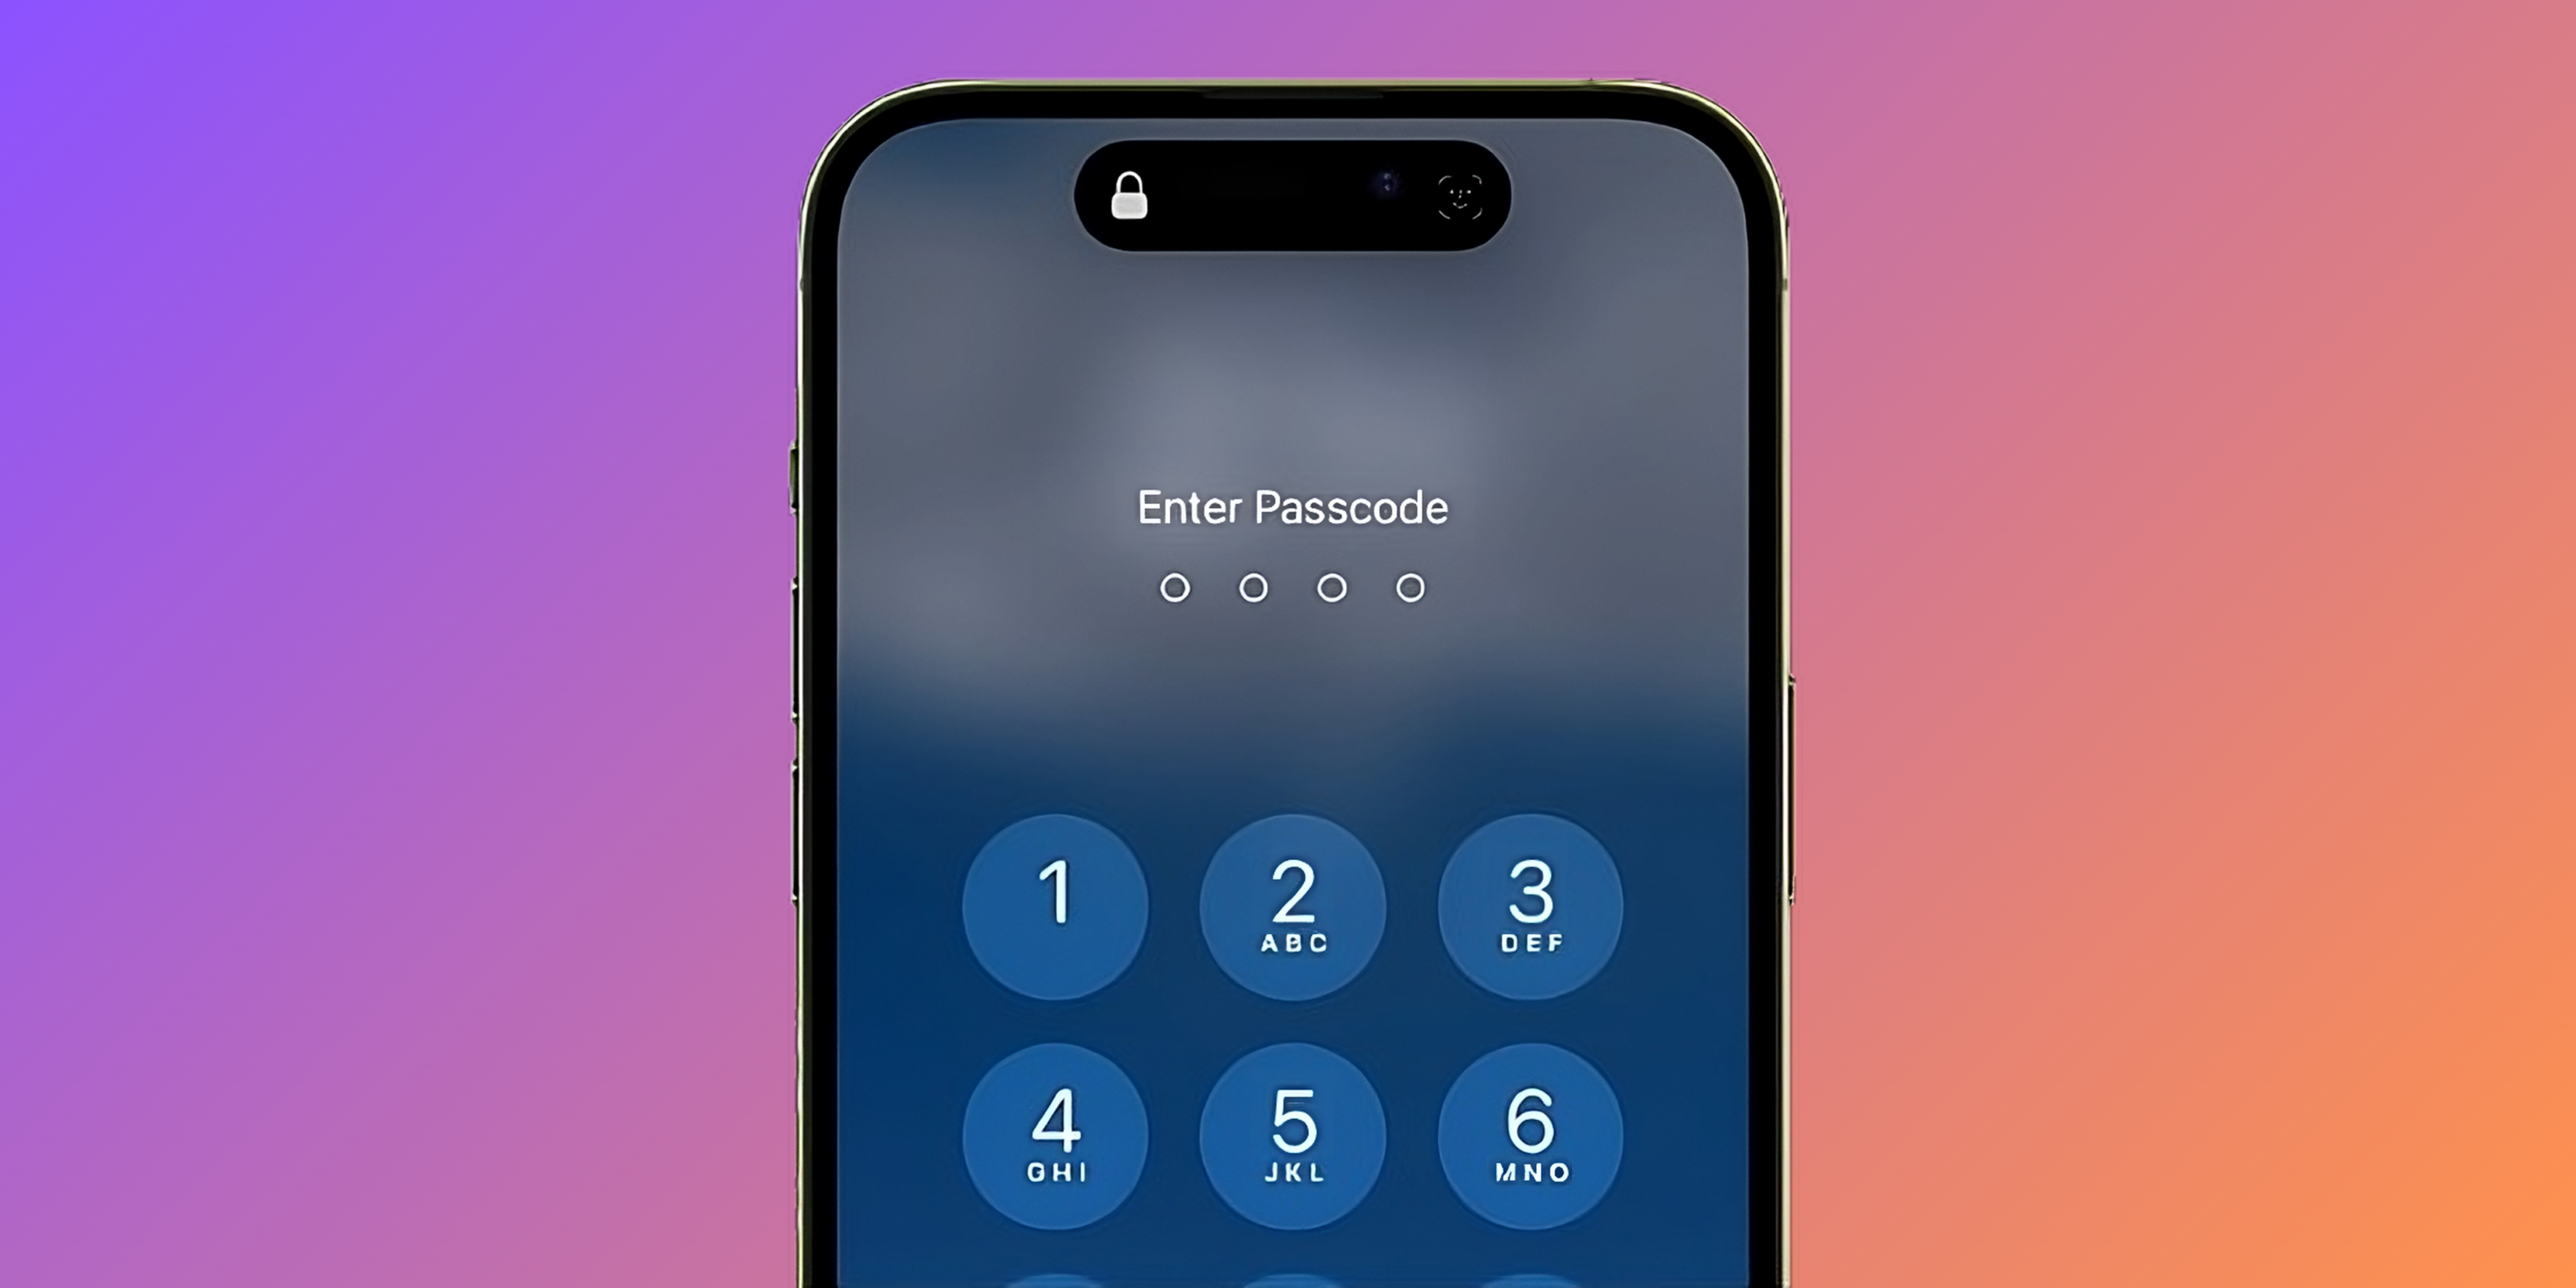 How to change passcode on iPhone or iPad